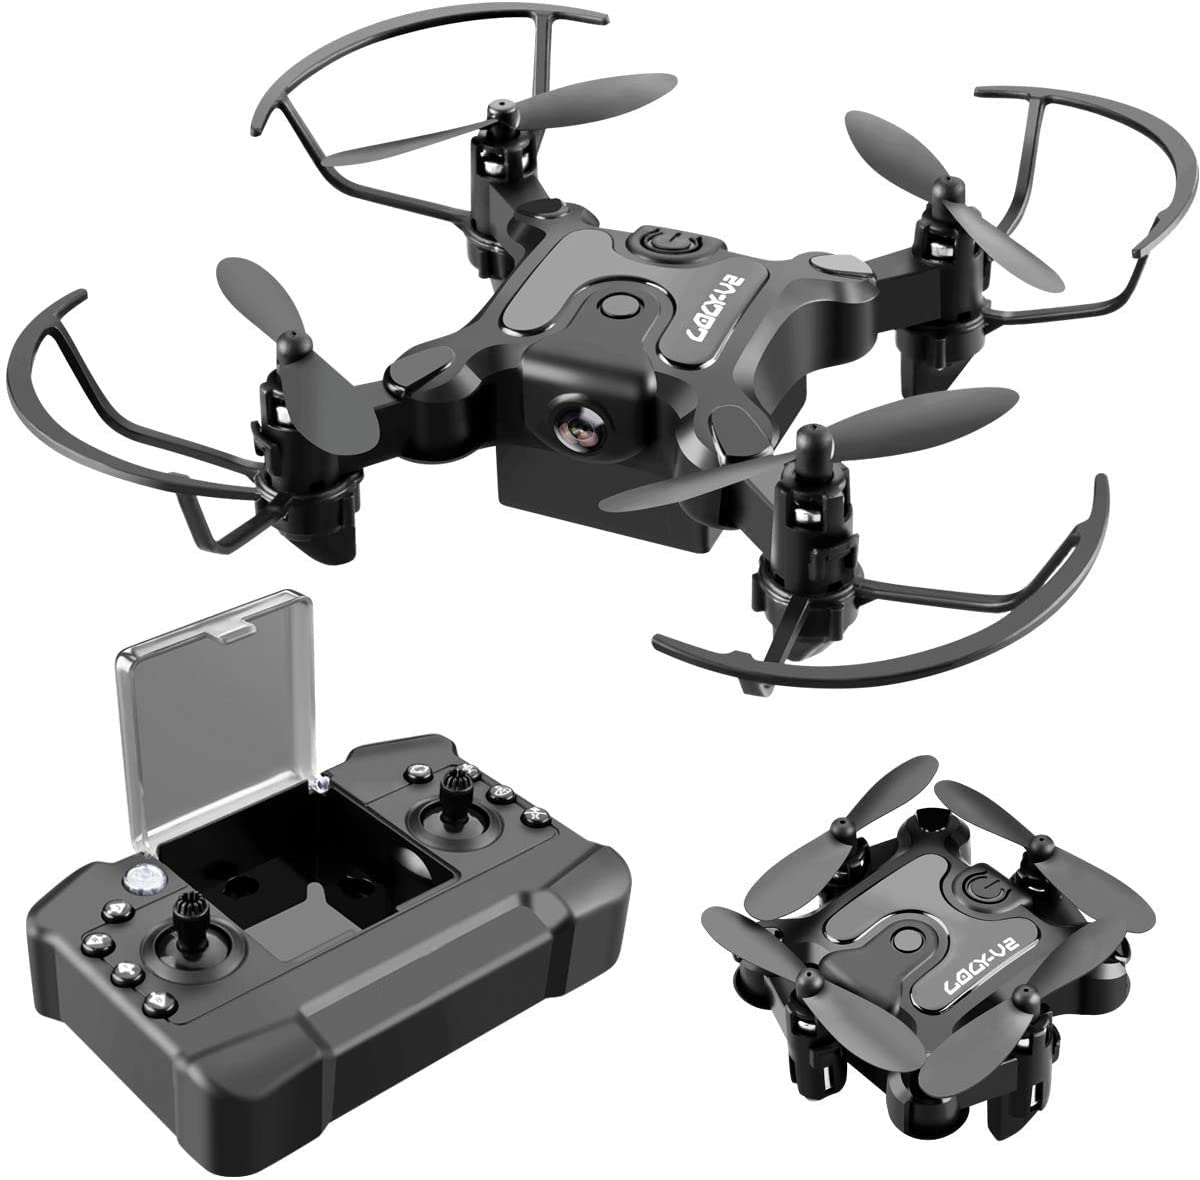 Foldable Mini Drone for Kids Toys,V2 Nano Pocket RC Quadcopter for Beginners Gift,with 3 Batteries,Altitude Hold, Headless Mode,3D Flips, One Key Return,3 Speed Modes,Easy Fly